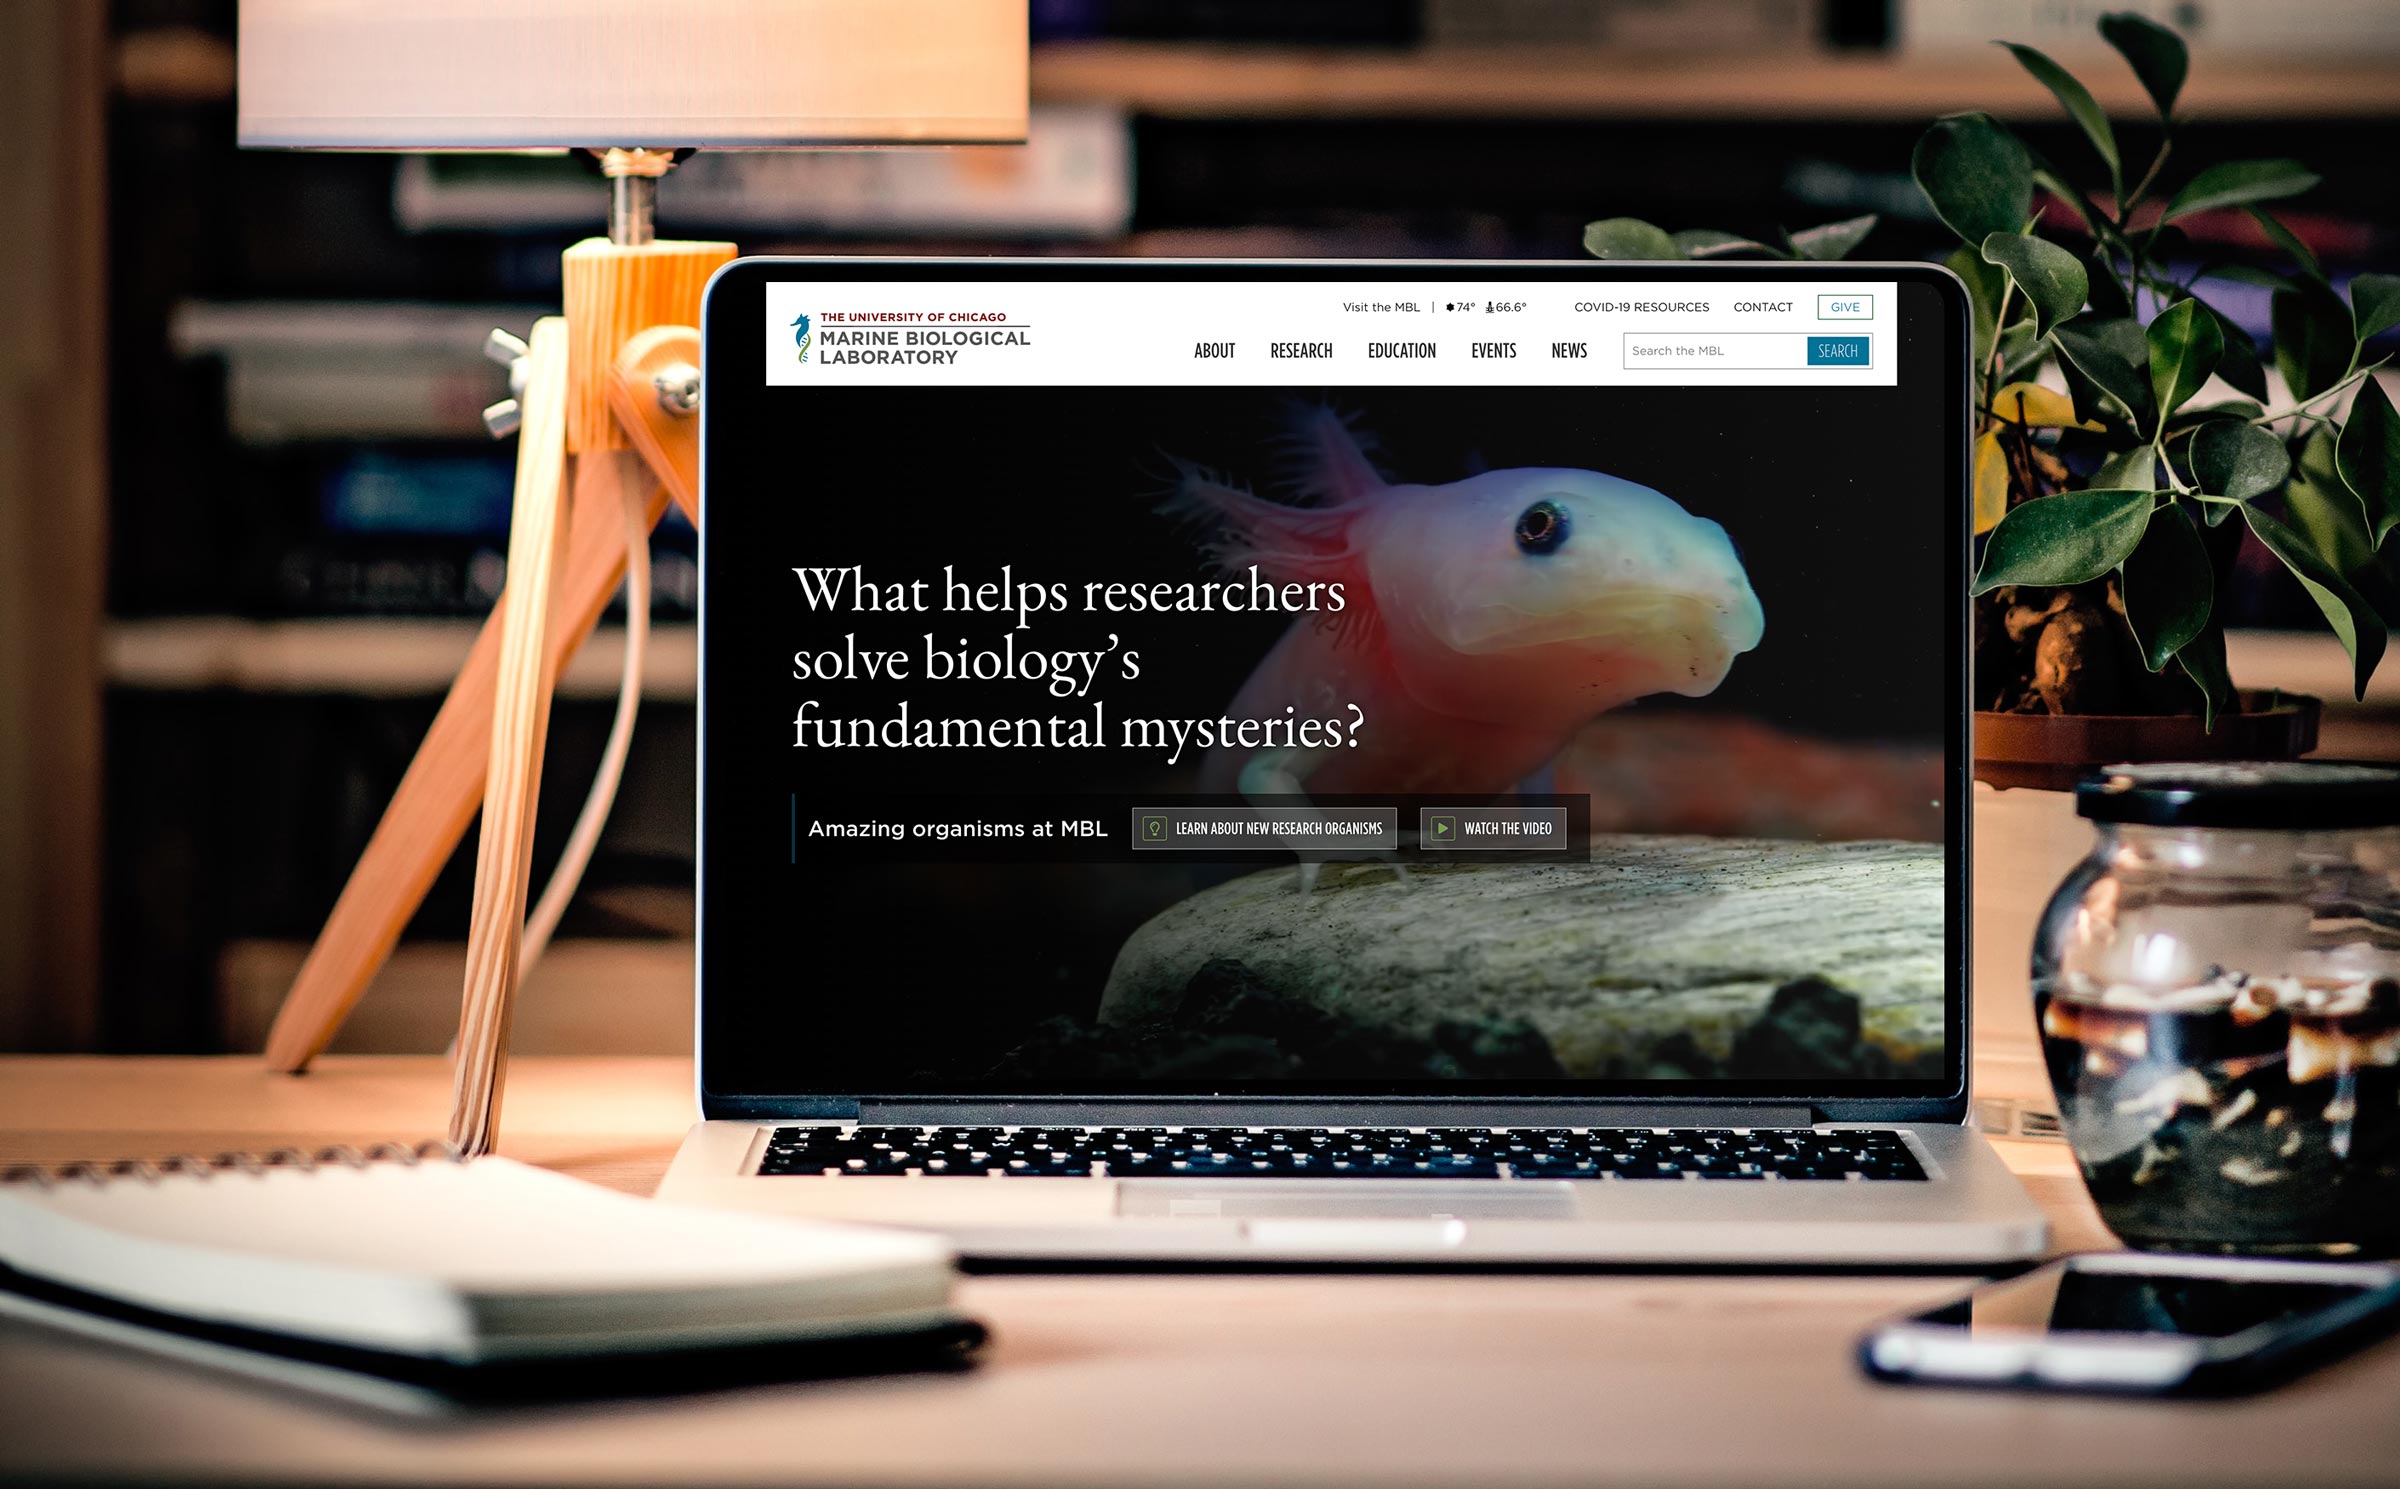 The homepage featuring a fish shown on a lapt on a desk with lamp in the background